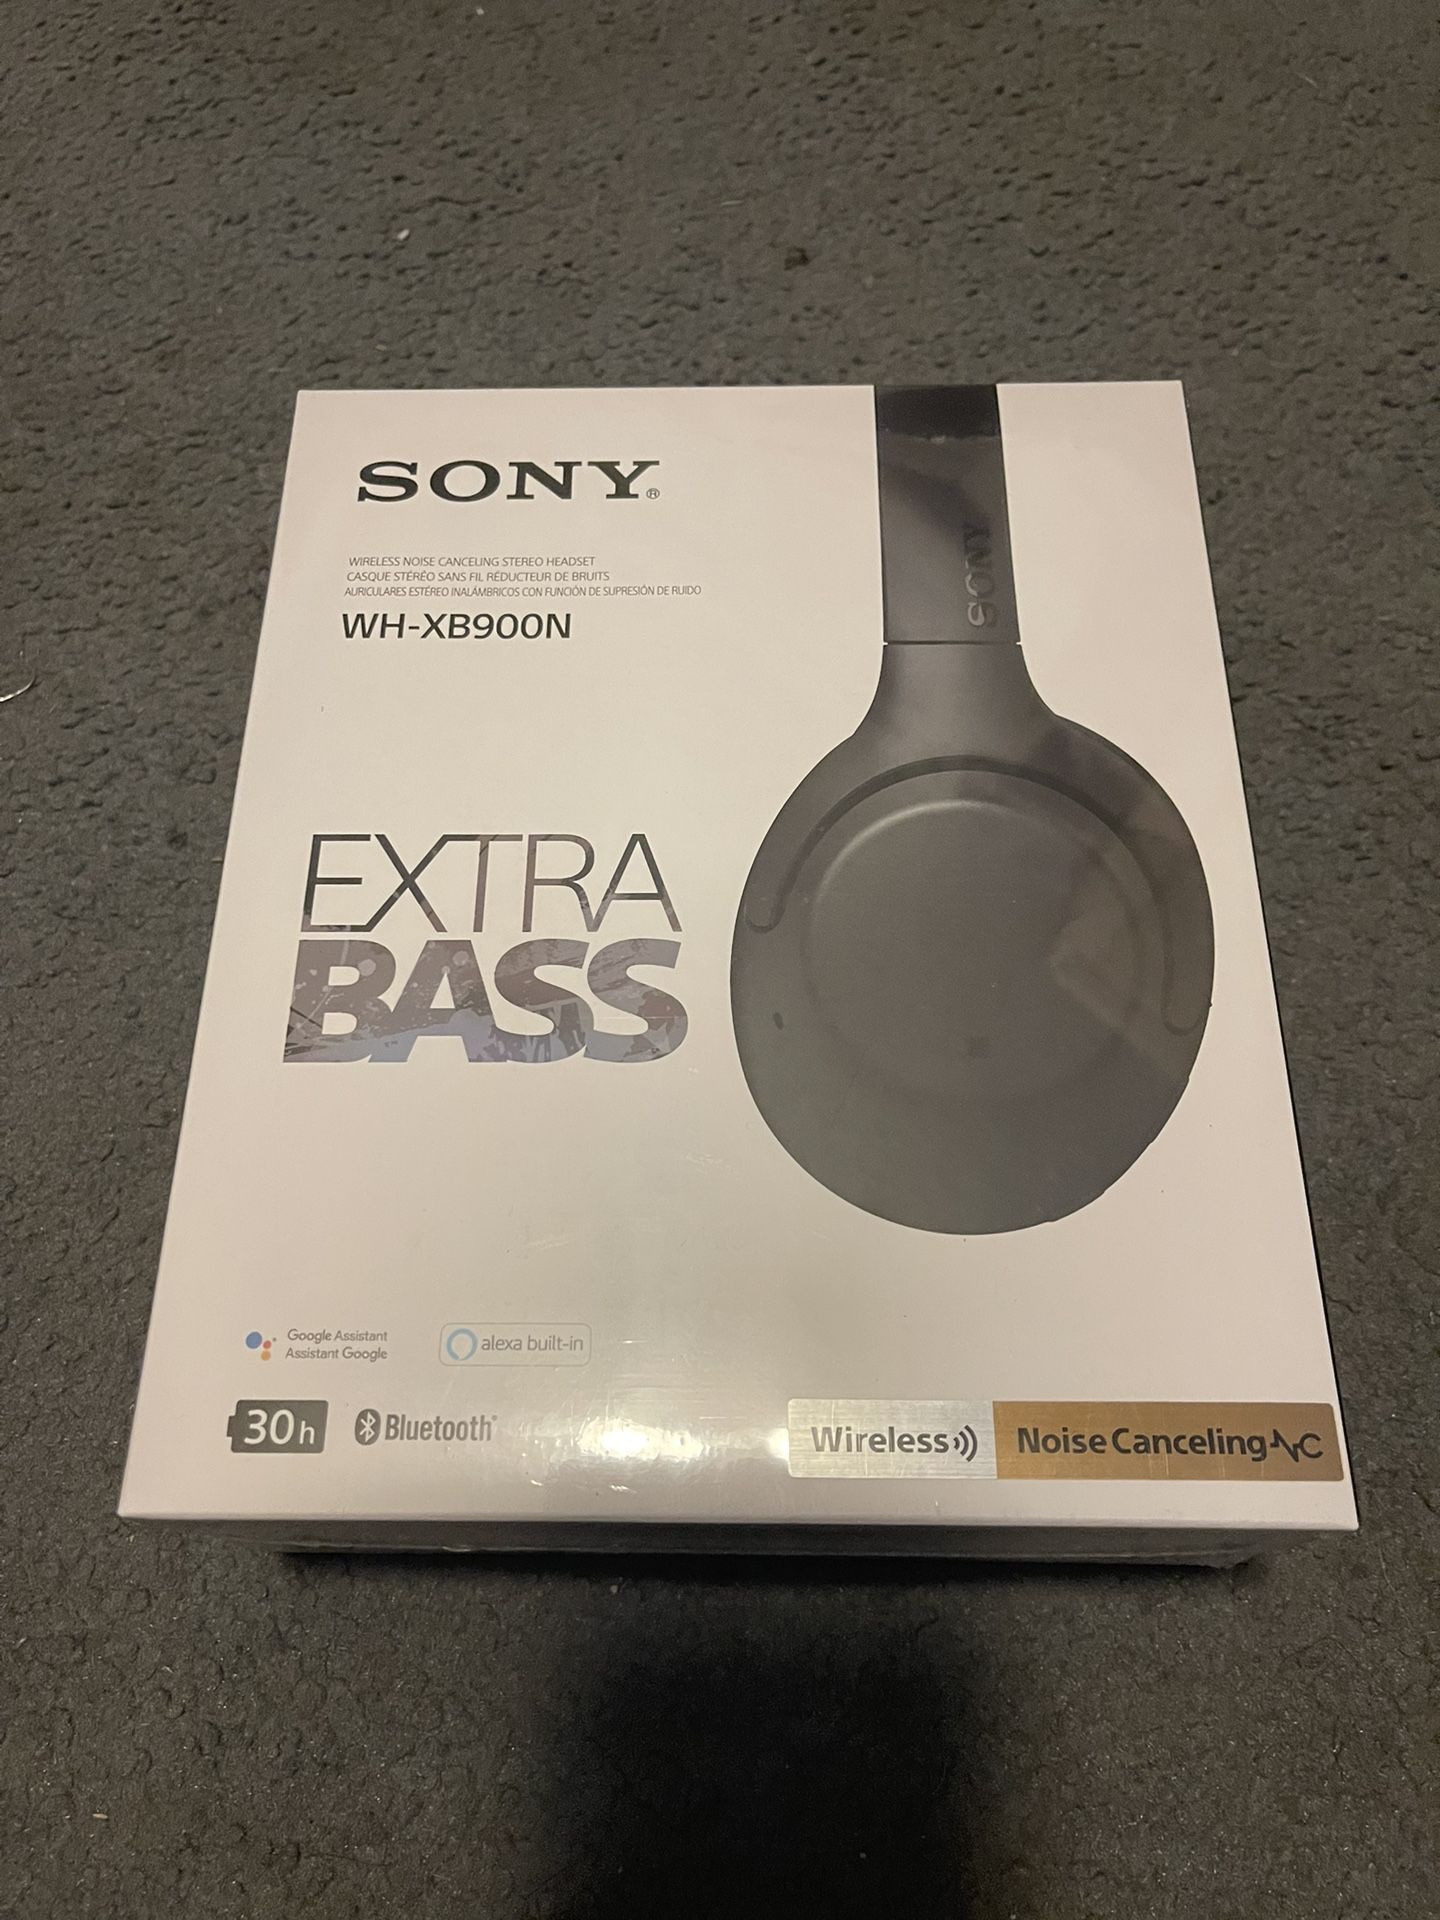 Sony wireless noise, cancellation, Stereo headsets. New in box  Never opened with plastic sealed